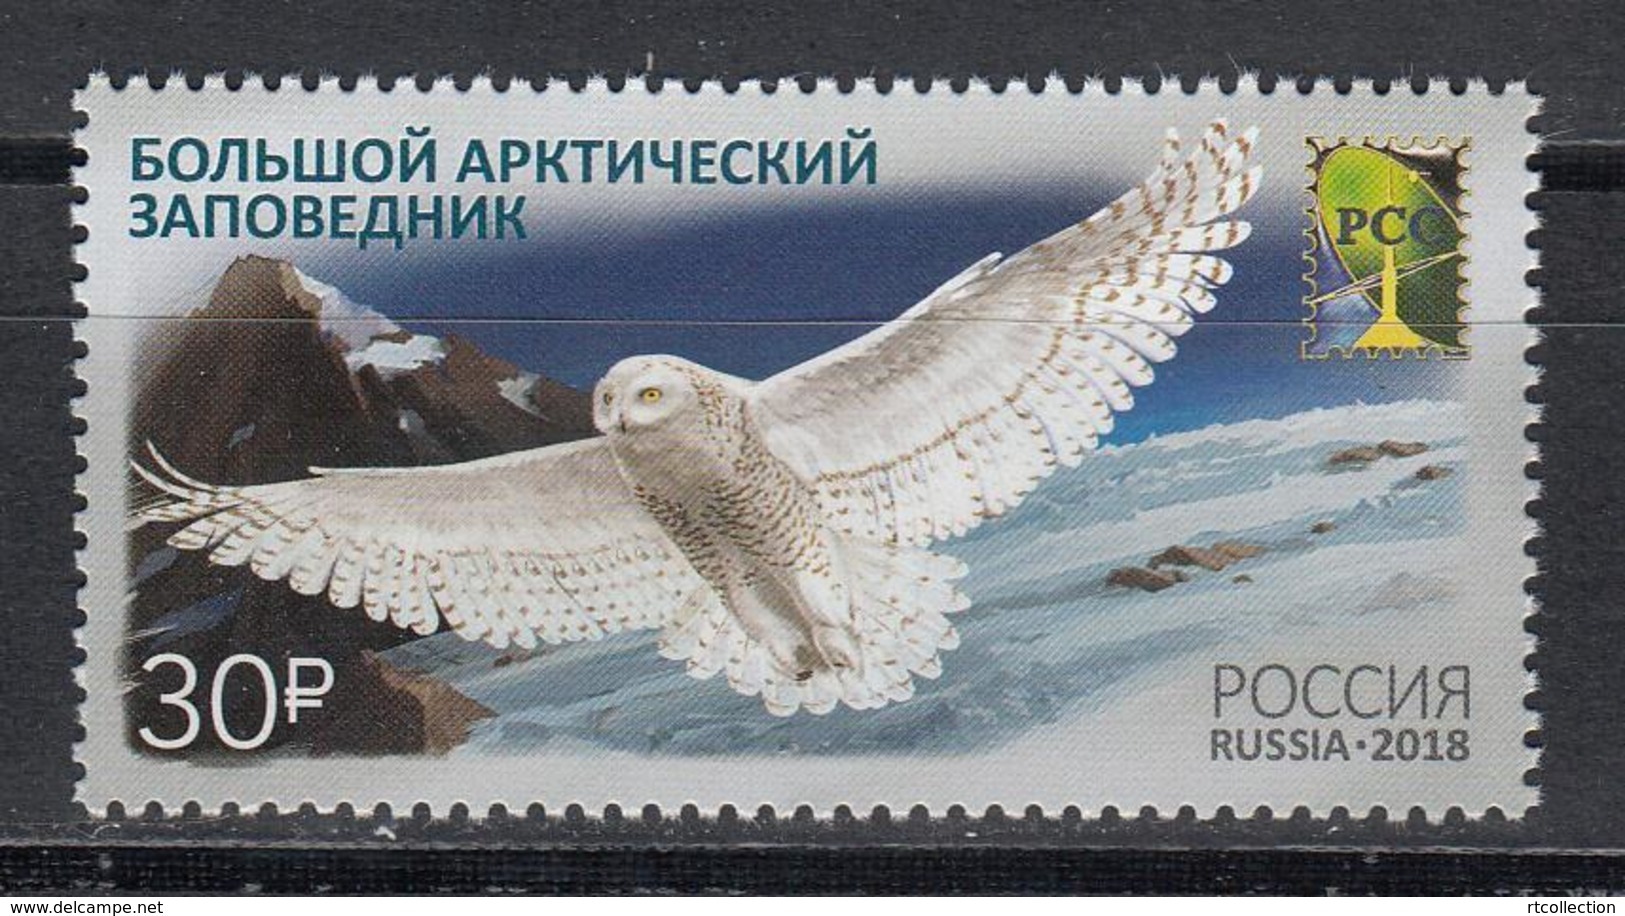 Russia 2018 - One Joint RCC Issue Nature Reserves Bubo Scandiacus Owls Birds Animals Fauna Owl Bird Stamps MNH Mi 2538 - Owls